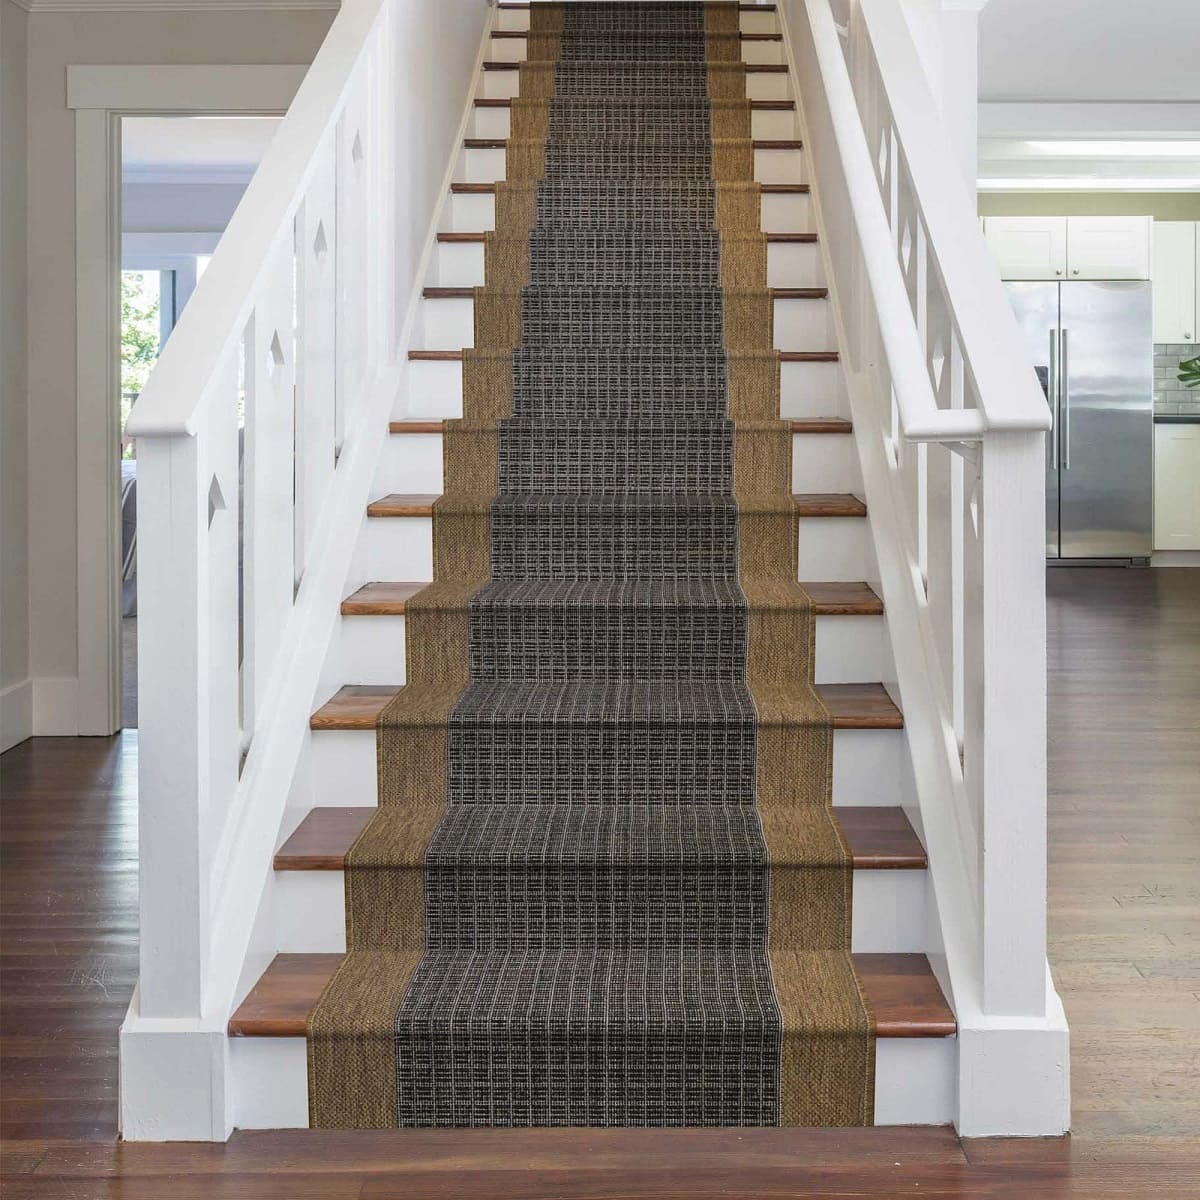 How To Install Runner On Stairs